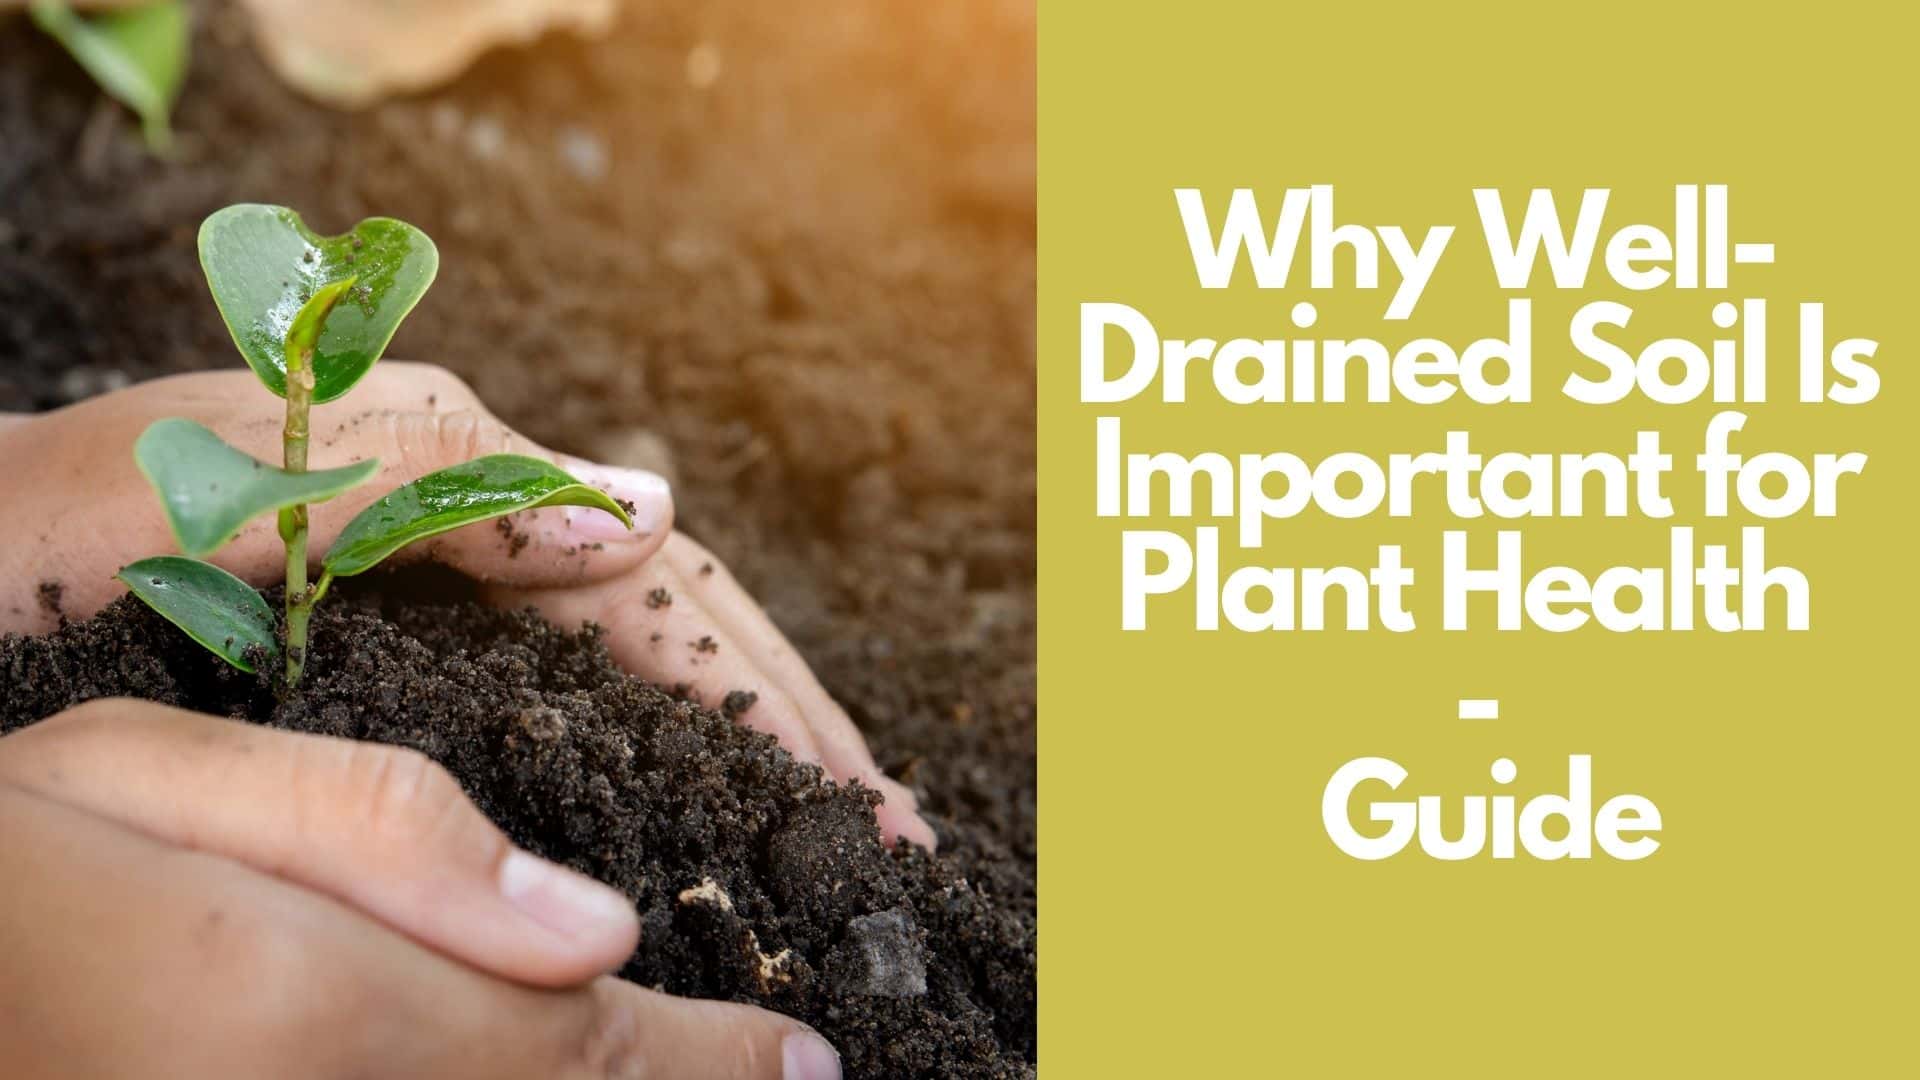 Why Well-Drained Soil Is Important for Plant Health | Guide